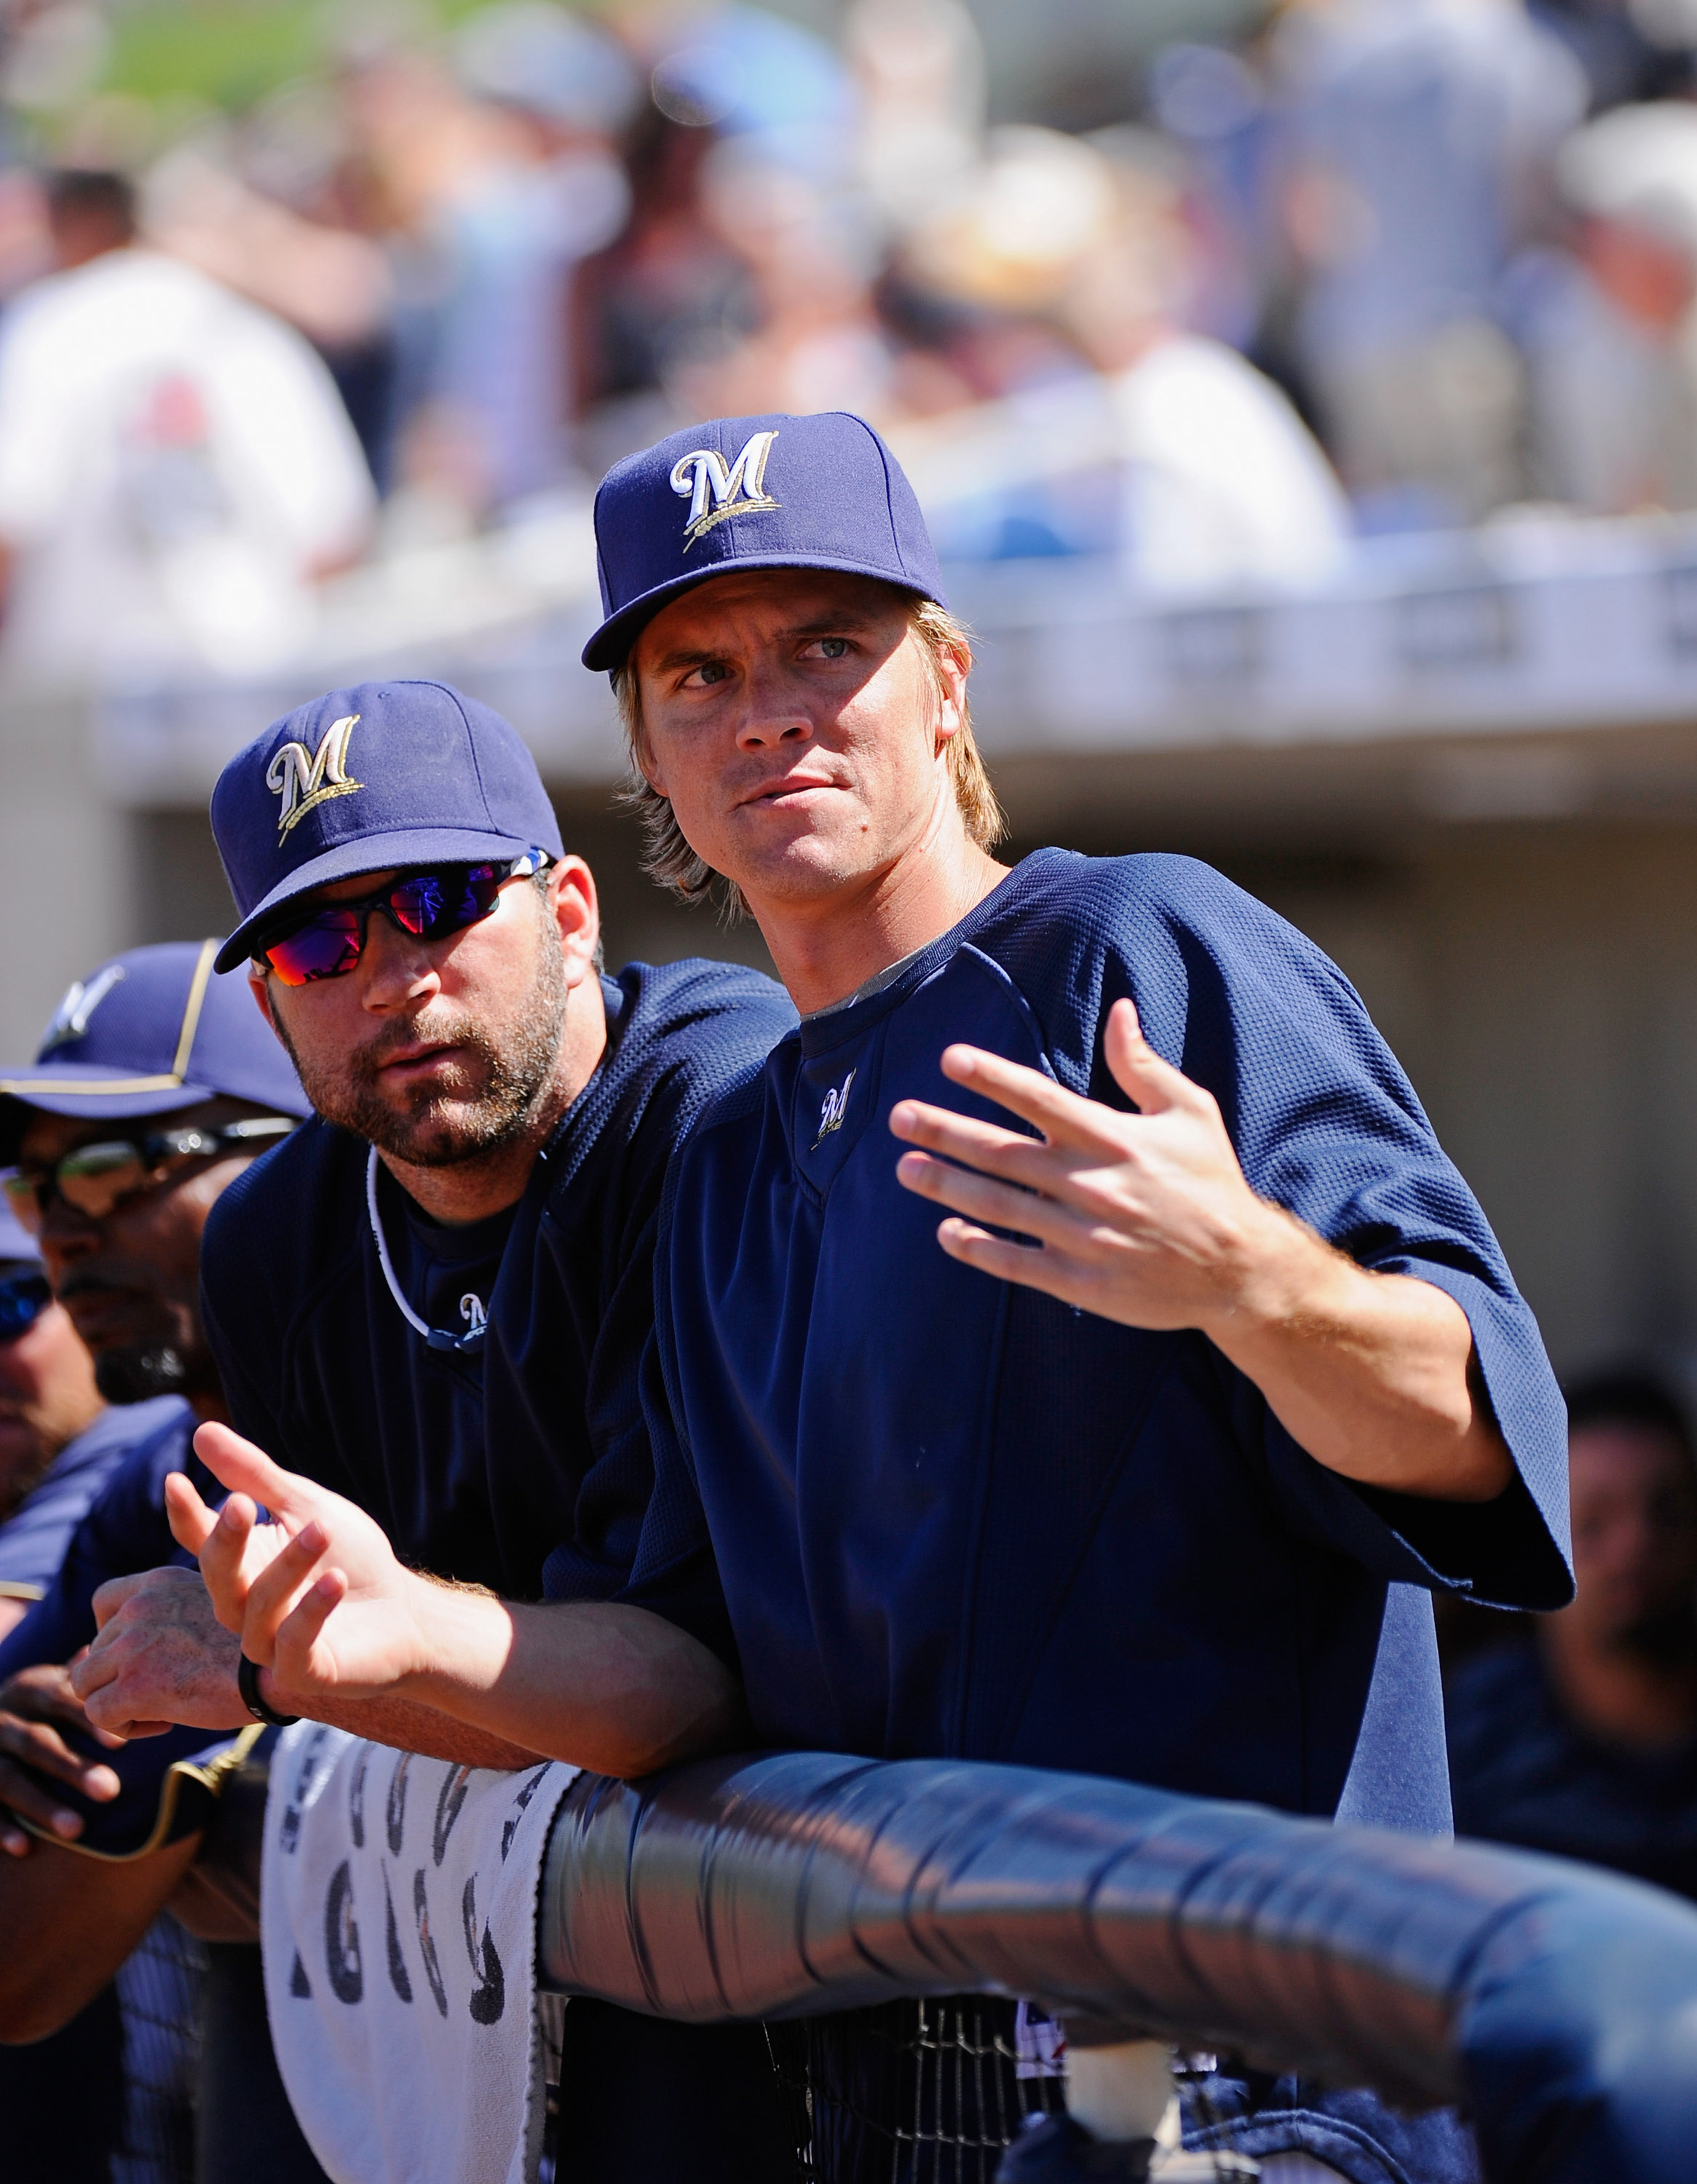 PHOENIX, AZ - MARCH 10:  Pitchers Zack Greinke #13 and Shaun Marcum #18  of the Milwaukee Brewers look at fans during the spring teaining baseball agme against Colorado Rockies at Maryvale Baseball Park on March 10, 2011 in Phoenix, Arizona.  (Photo by Ke